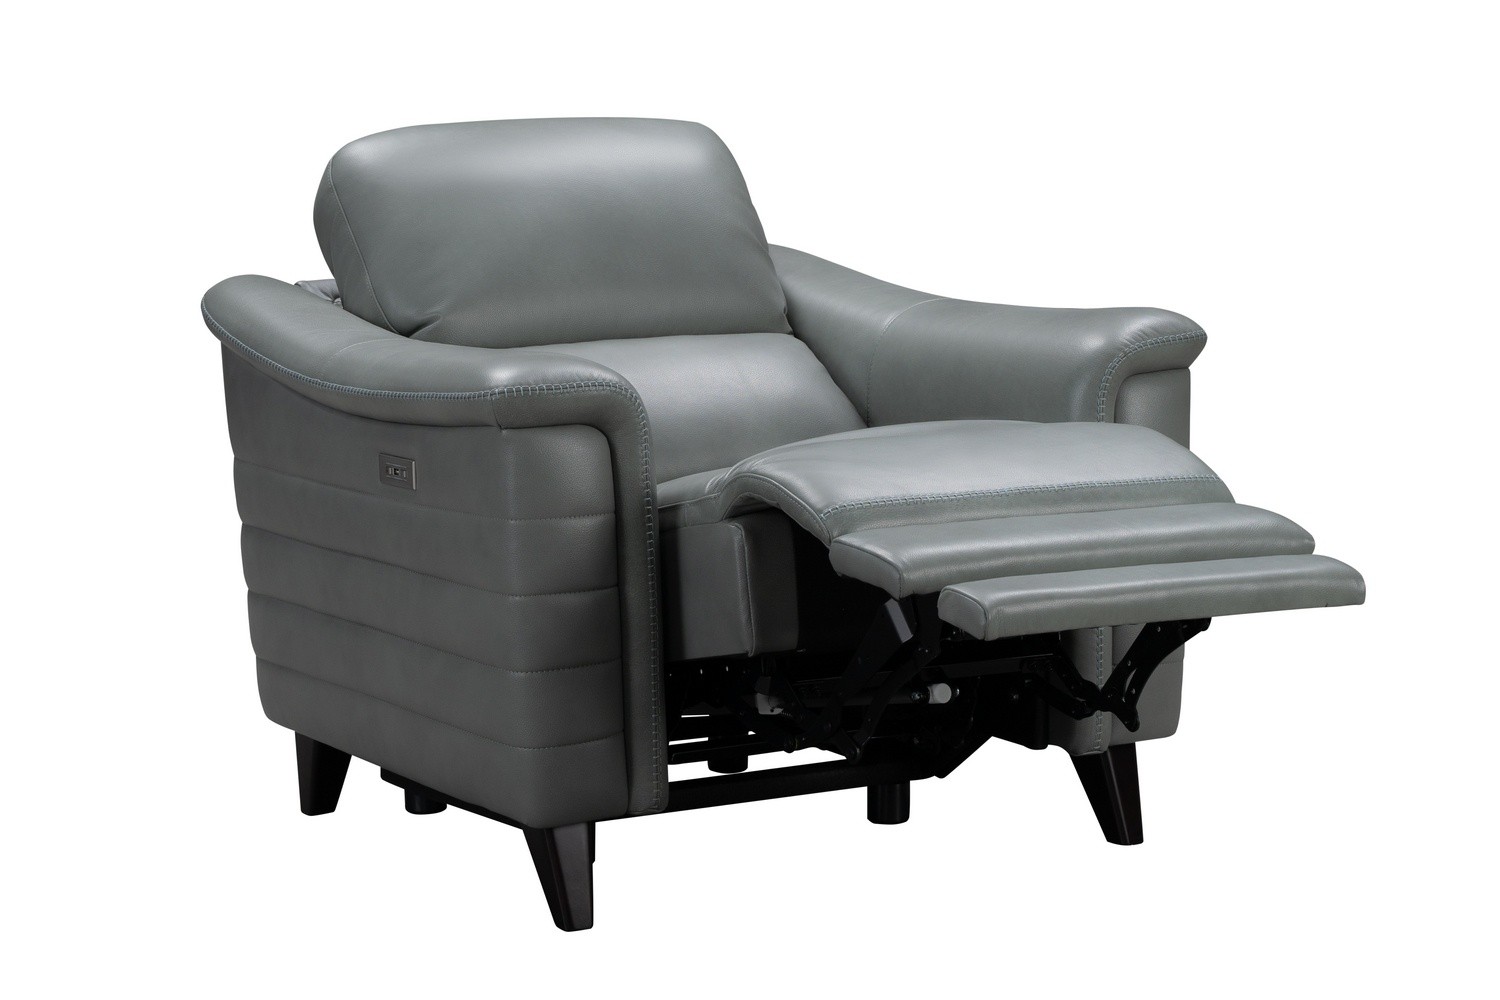 Barcalounger Malone Power Recliner Chair with Power Head Rest - Antonio Green Gray/Leather Match